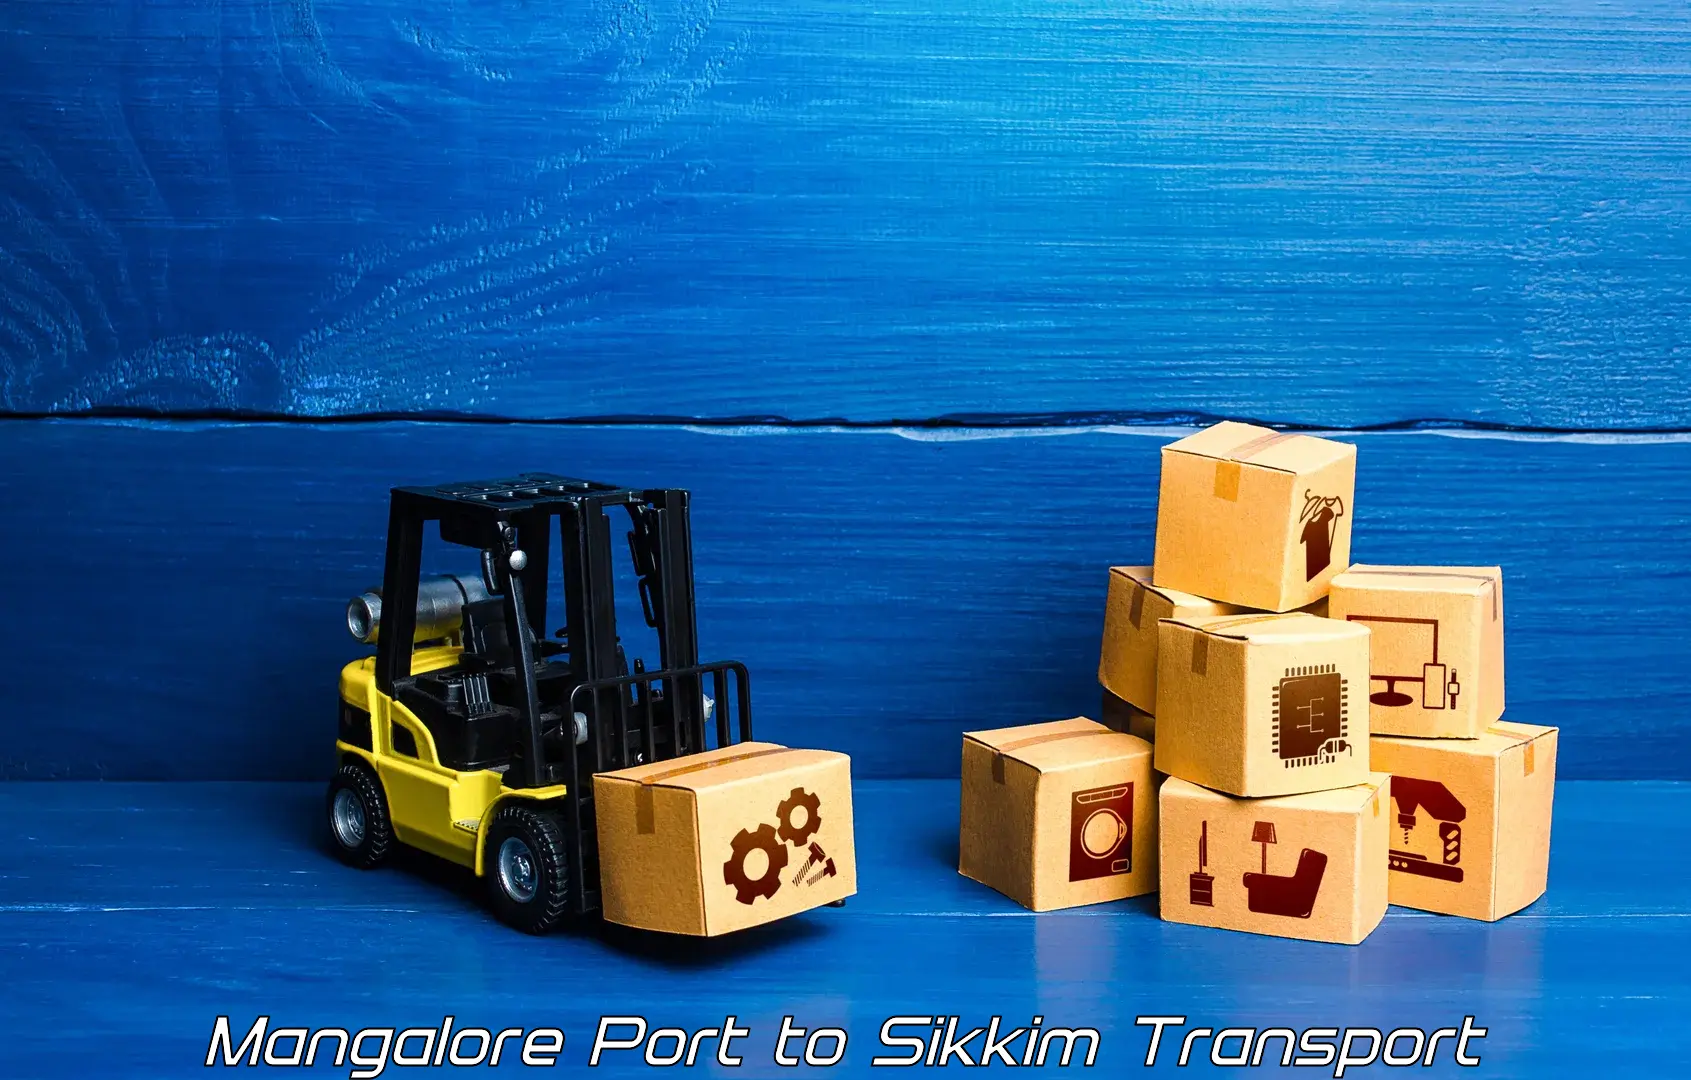 Commercial transport service Mangalore Port to South Sikkim